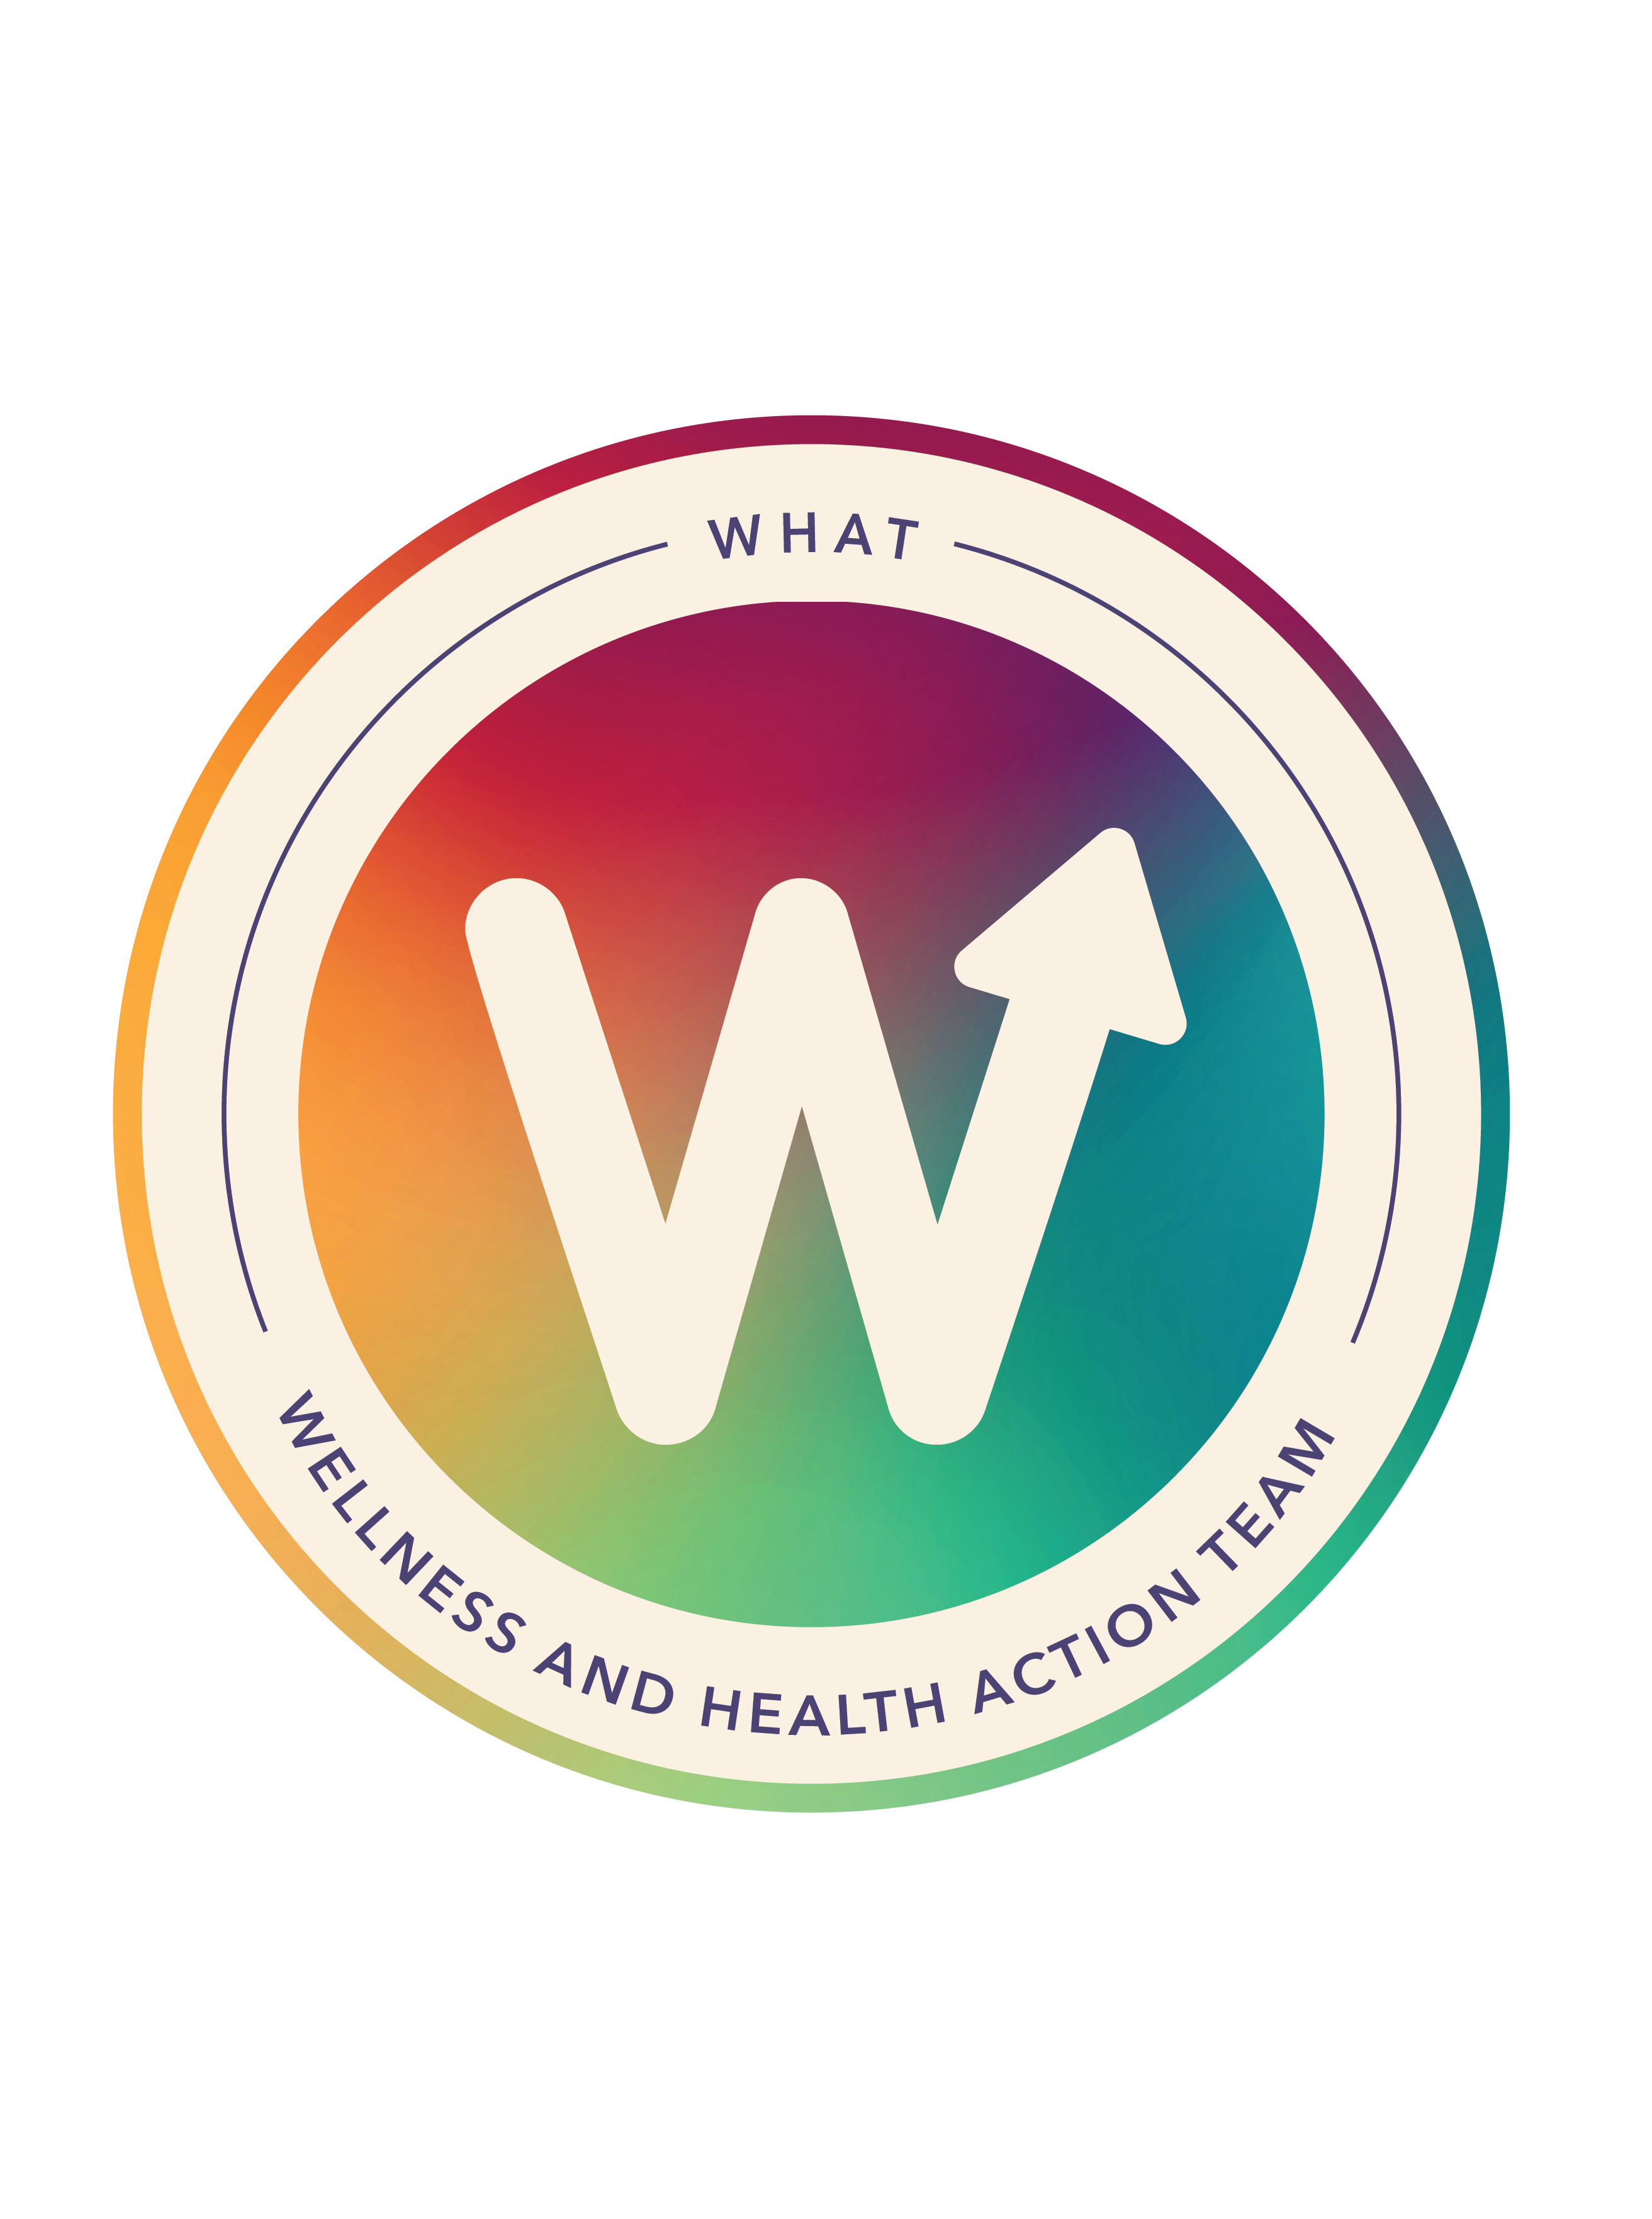 Wellness and Health Action Team logo with multicolored design.